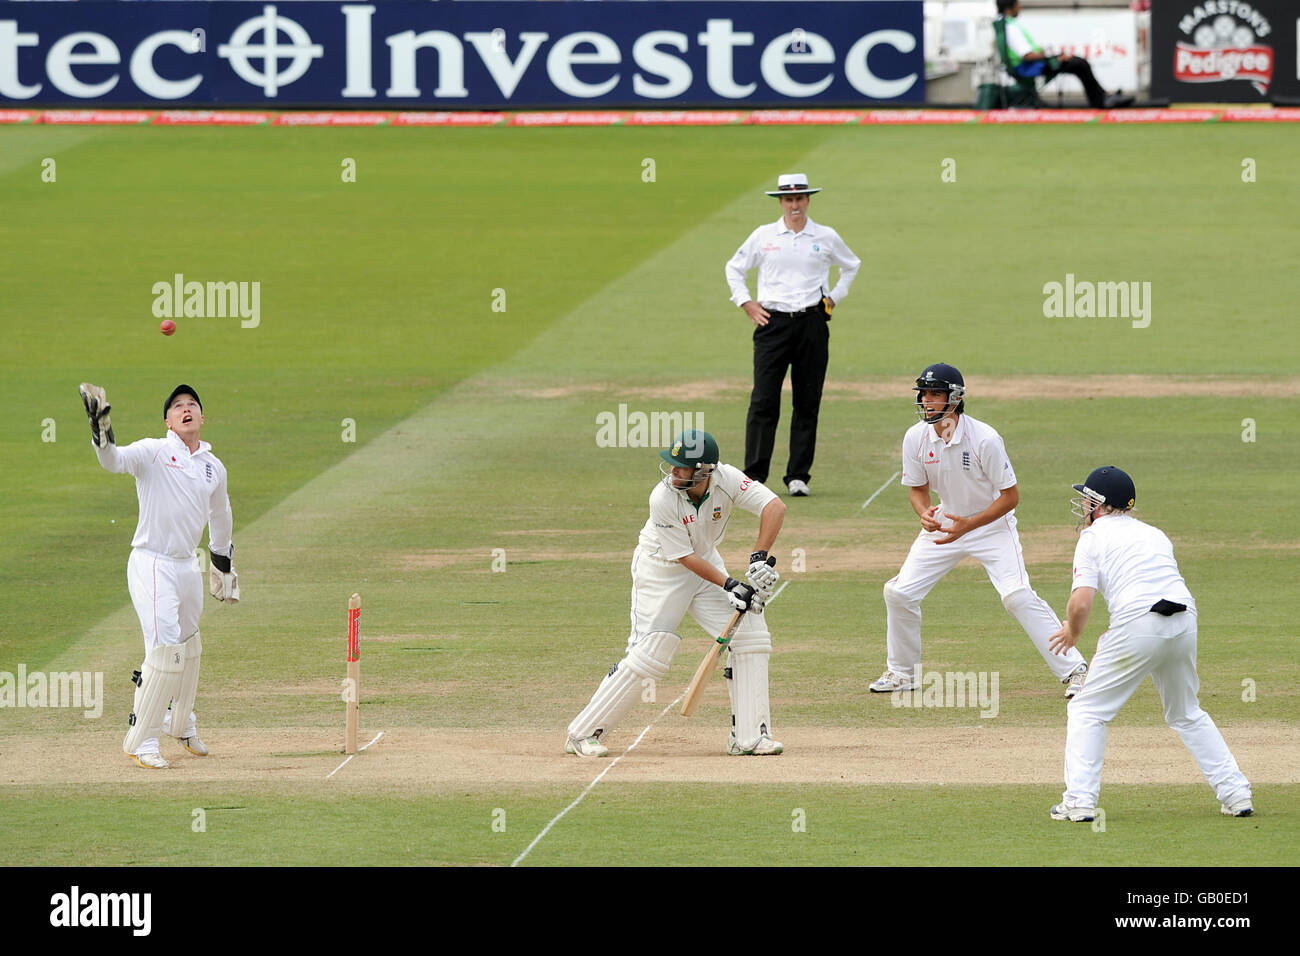 Cricket - npower First Test - Day Four - England v South Africa - Lord's. England's wicketkeeper Tim AMbrose (l) attempts to catch a ball while South Africa's Neil McKenzie bats Stock Photo